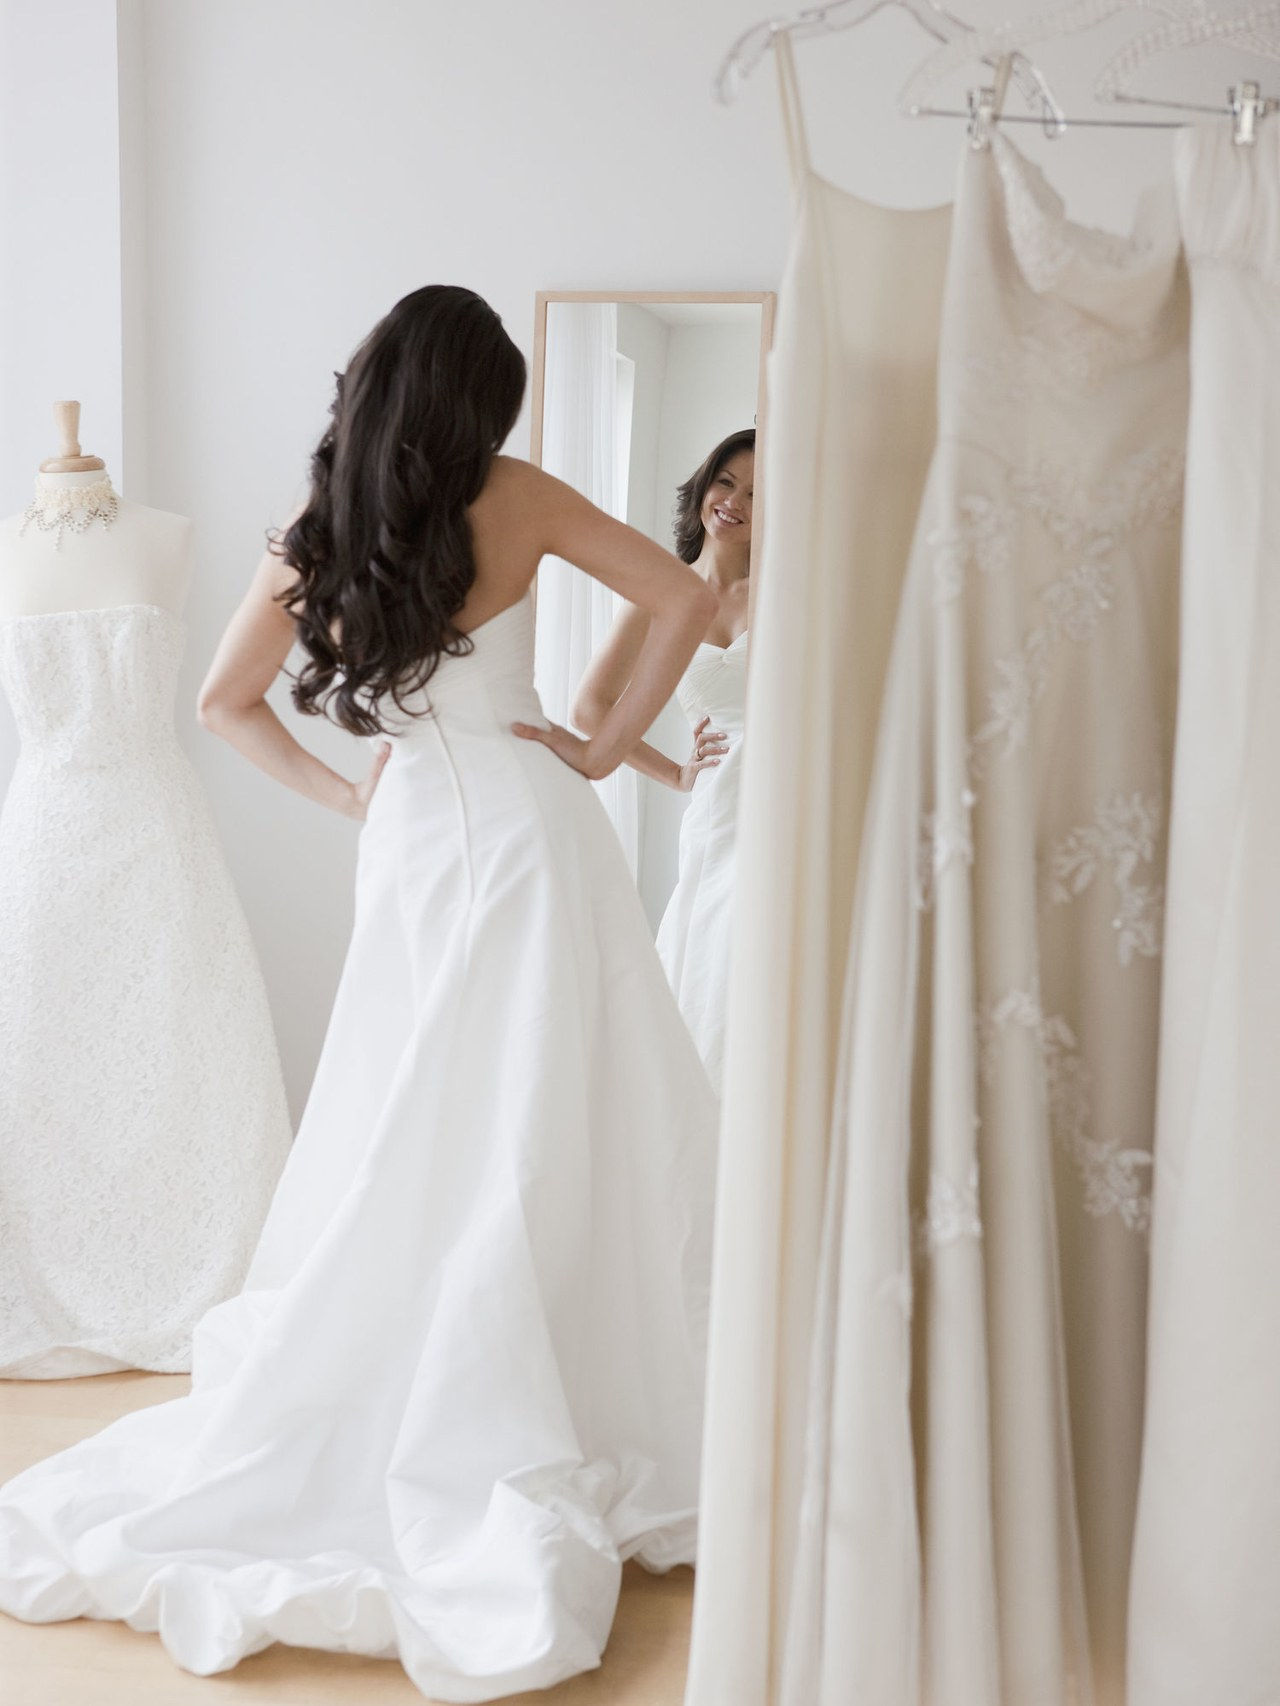 mujer trying on wedding dress